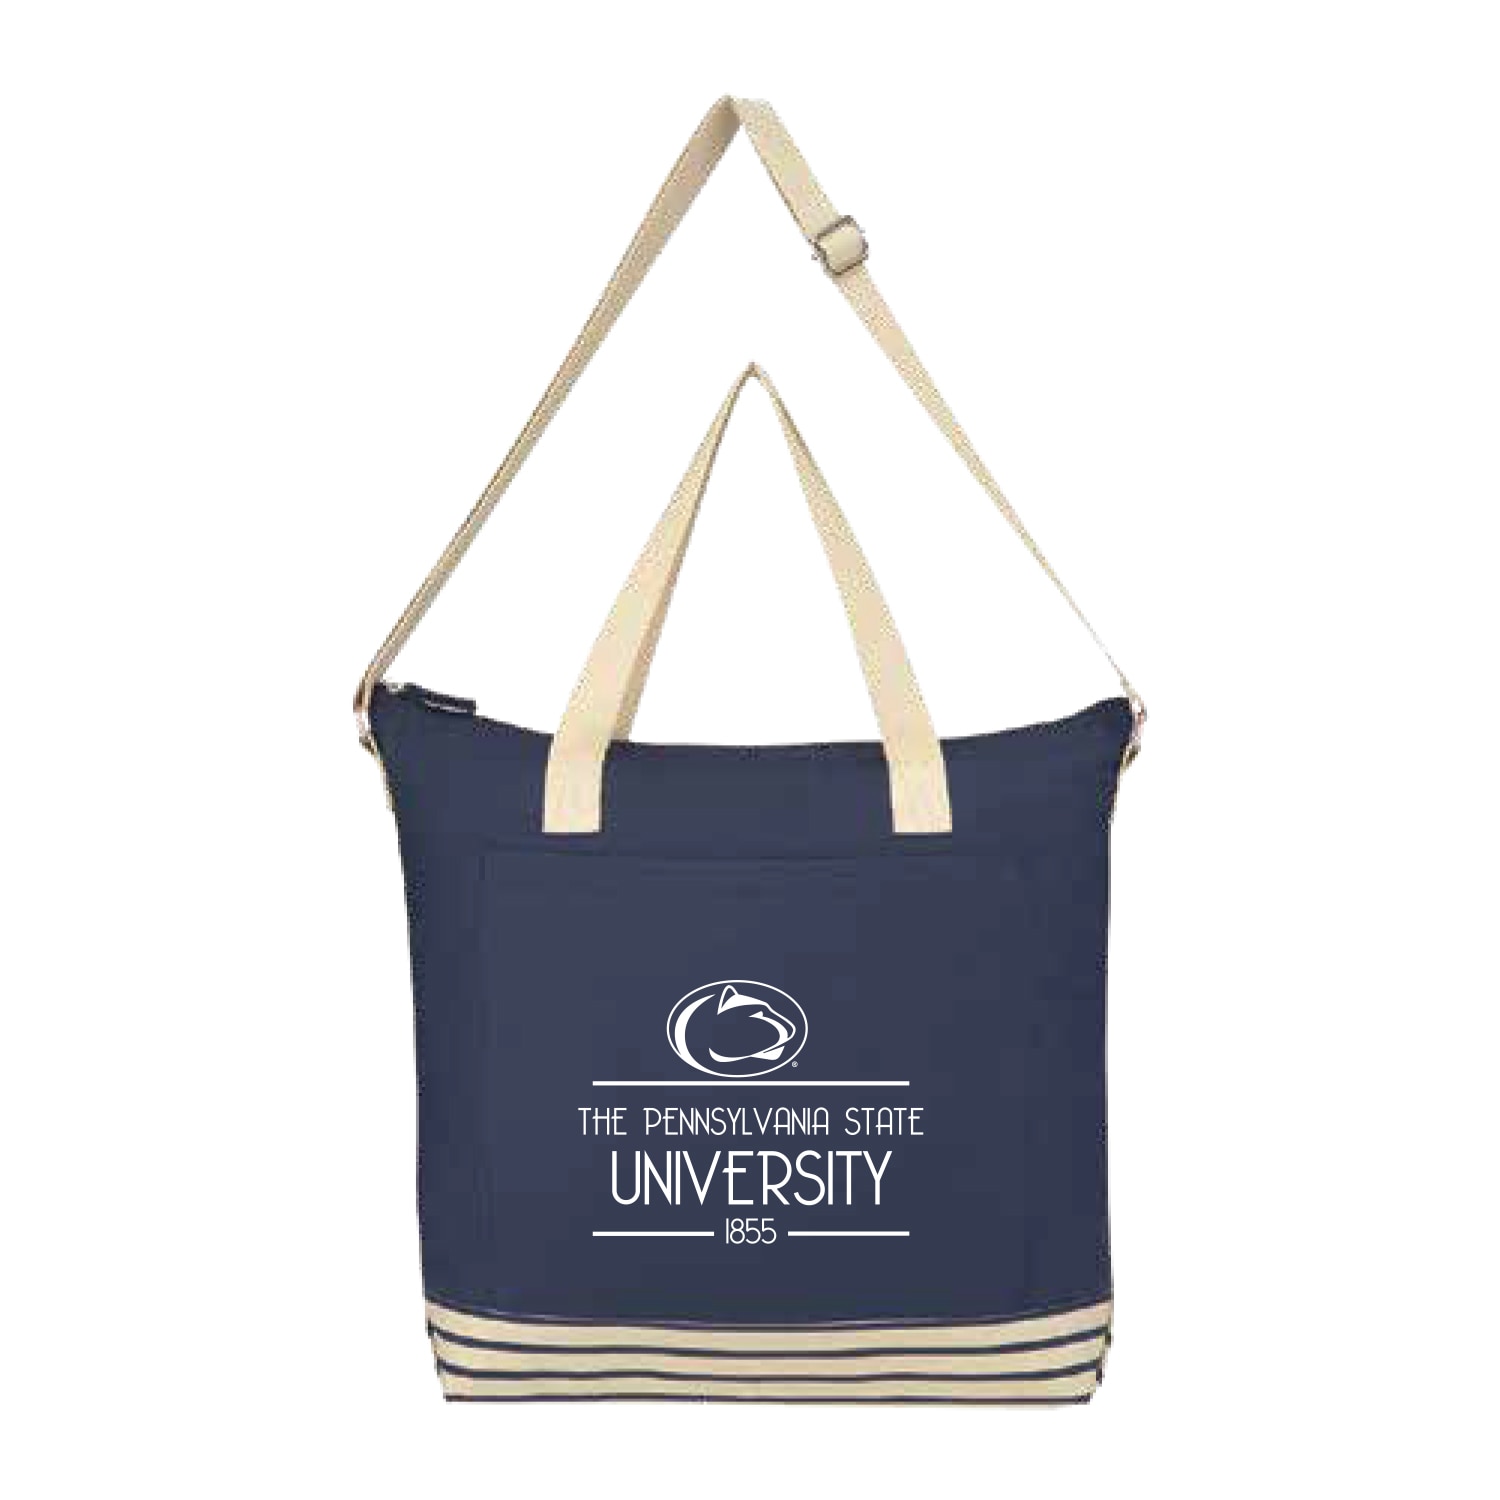 Penn State Nittany Lions 3247 Bottom Line Tote